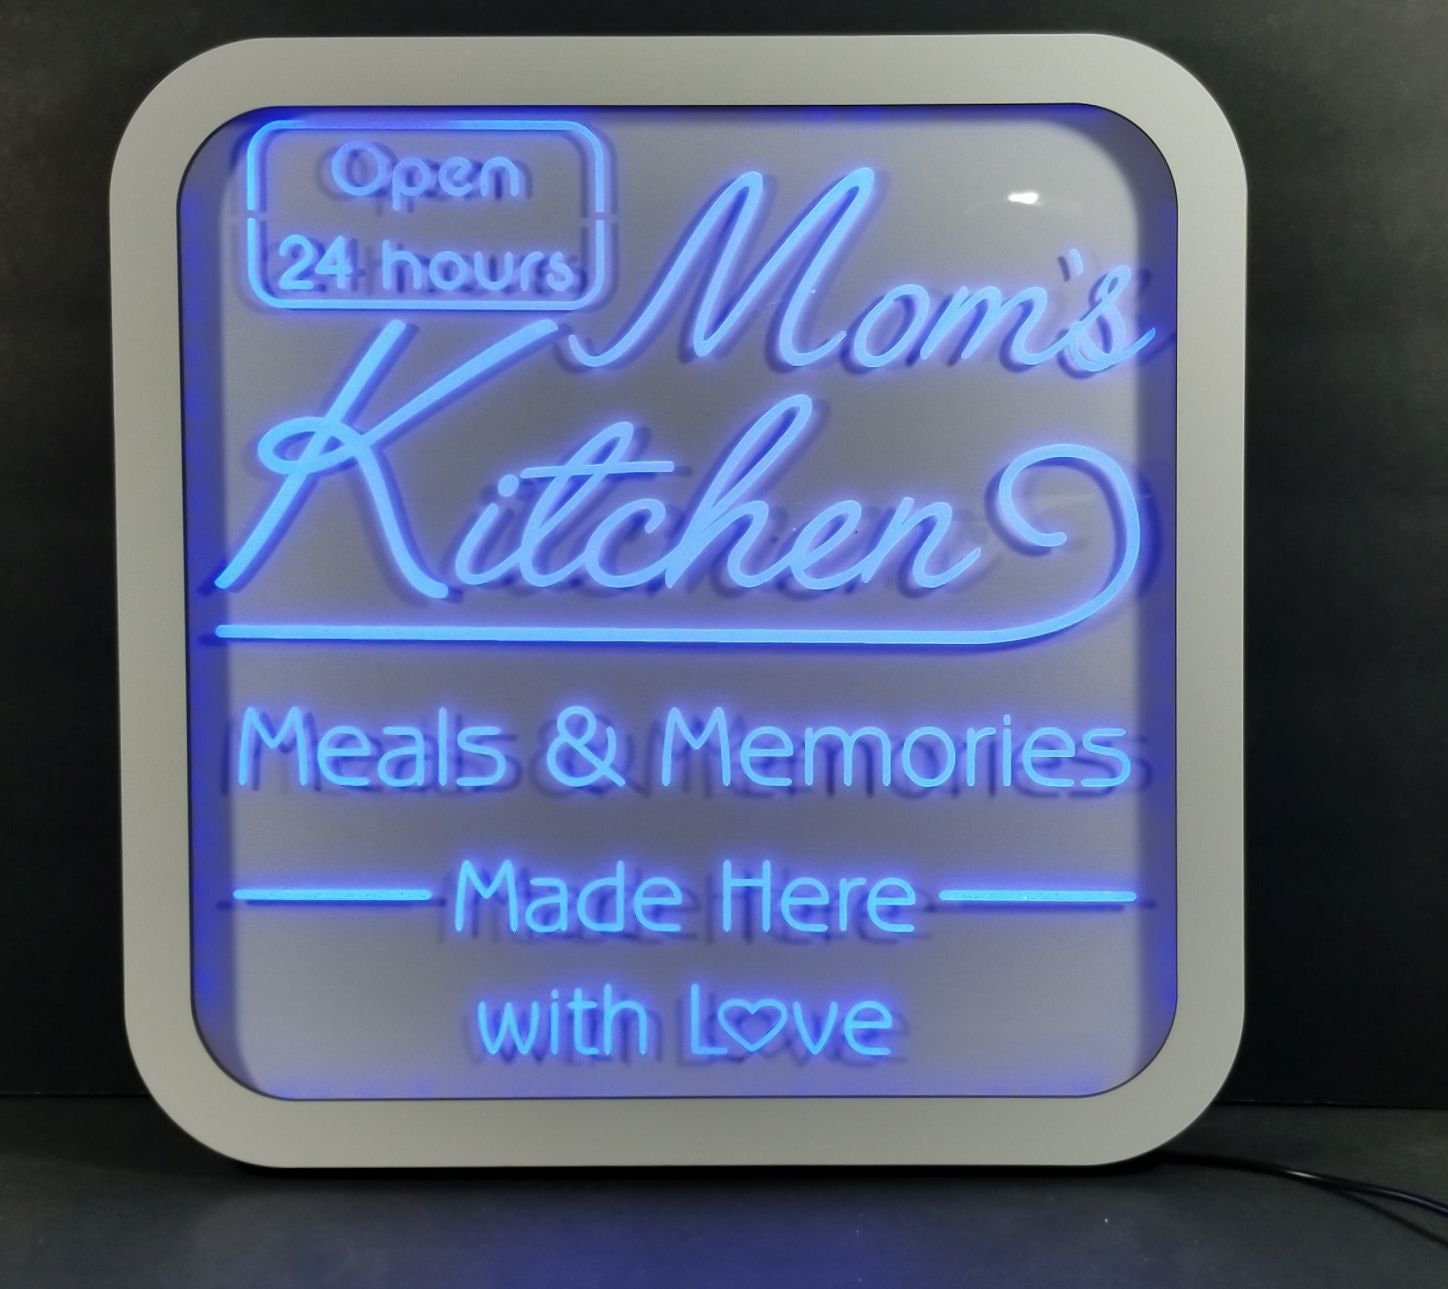 Custom Mom's Kitchen Led Wall Sign Neon Like - Color Changing Remote Control - 5 Sizes Free Shipping